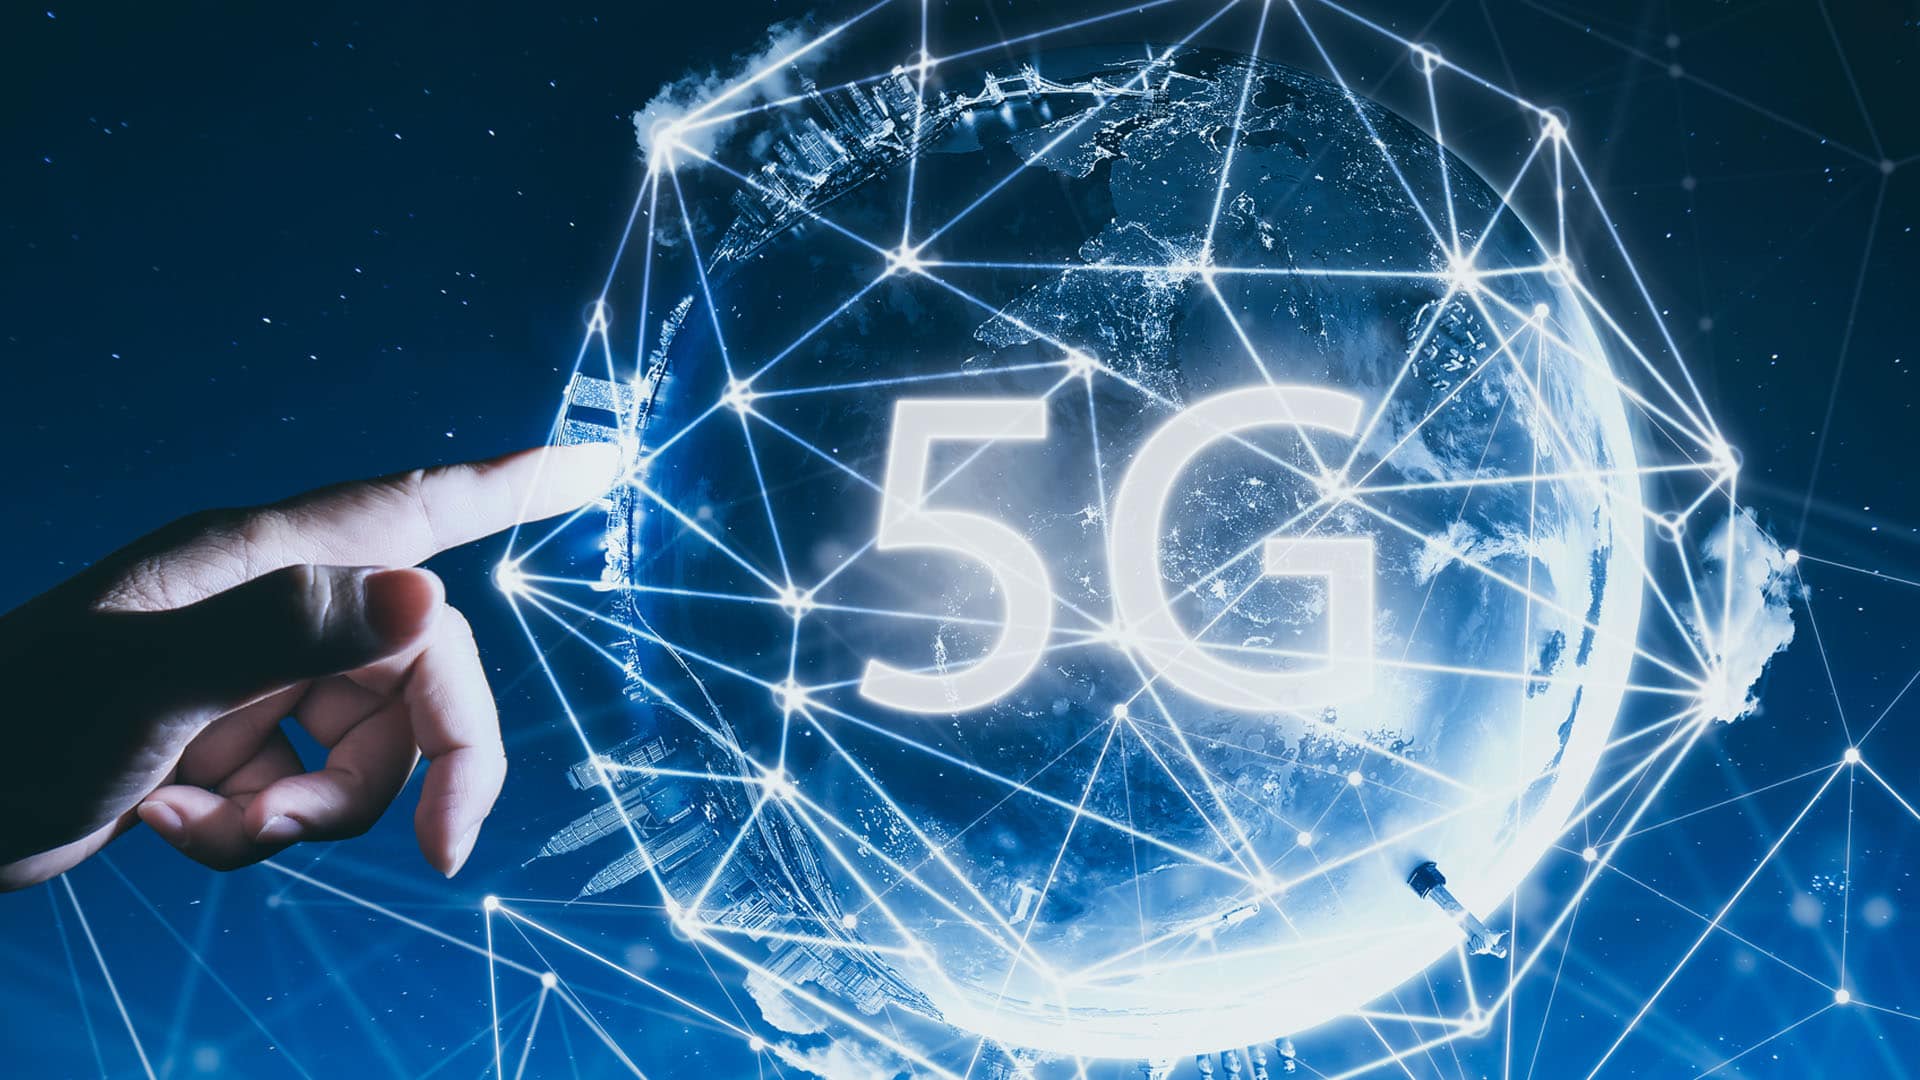 5G rollout - a boon for remote workers? - News